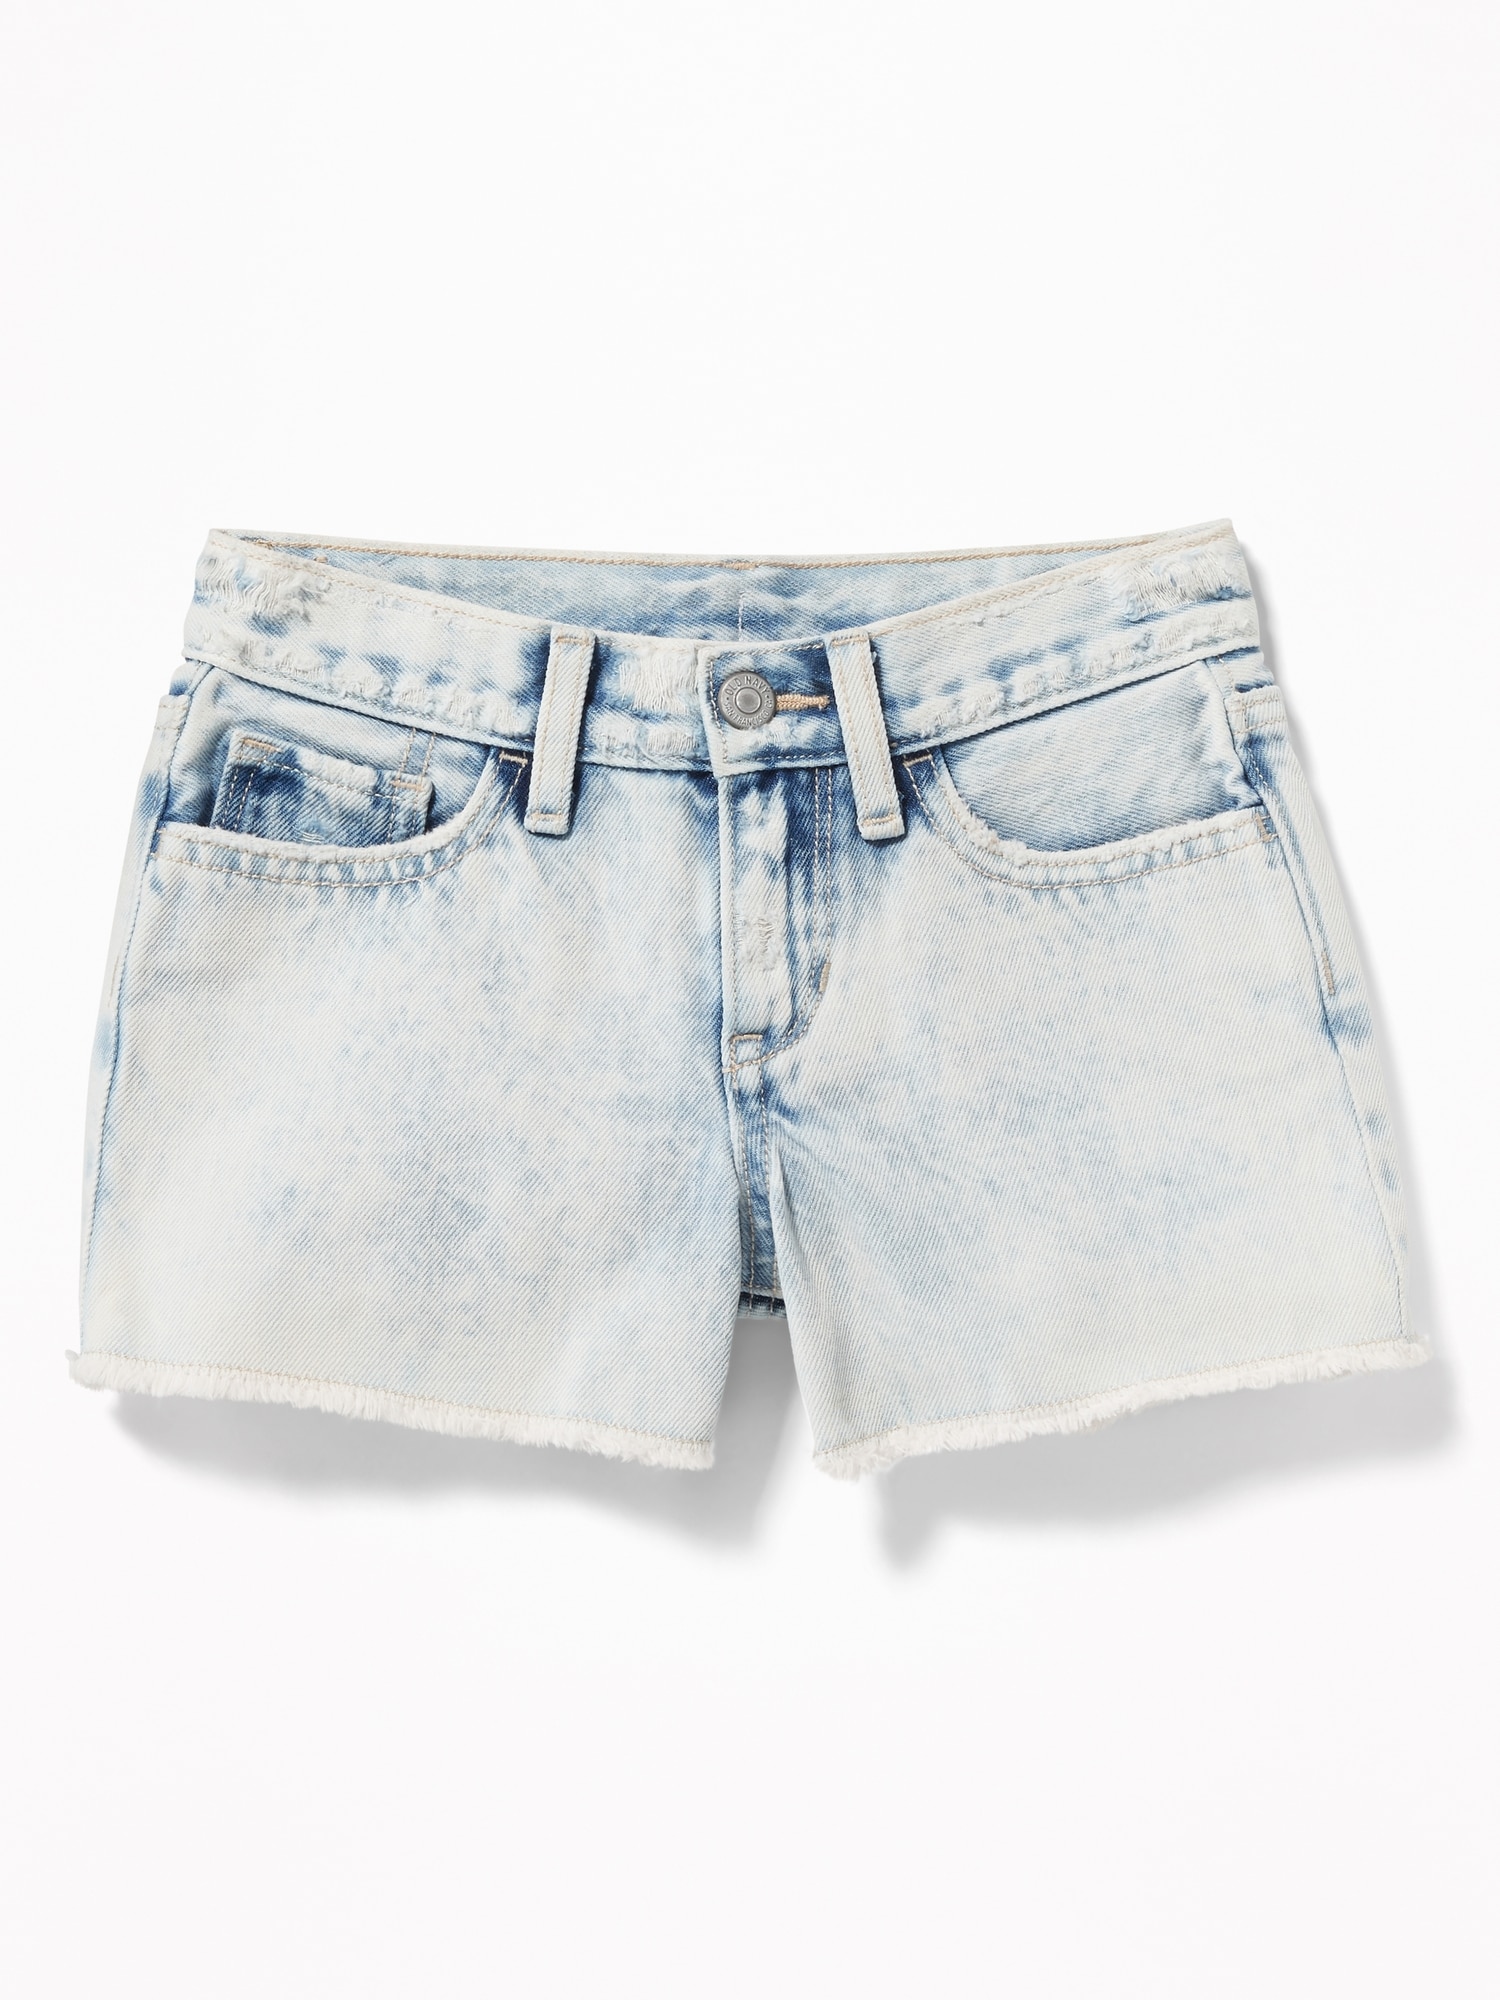 Acid-Wash Distressed Jean Cut-Off Shorts for Girls | Old Navy